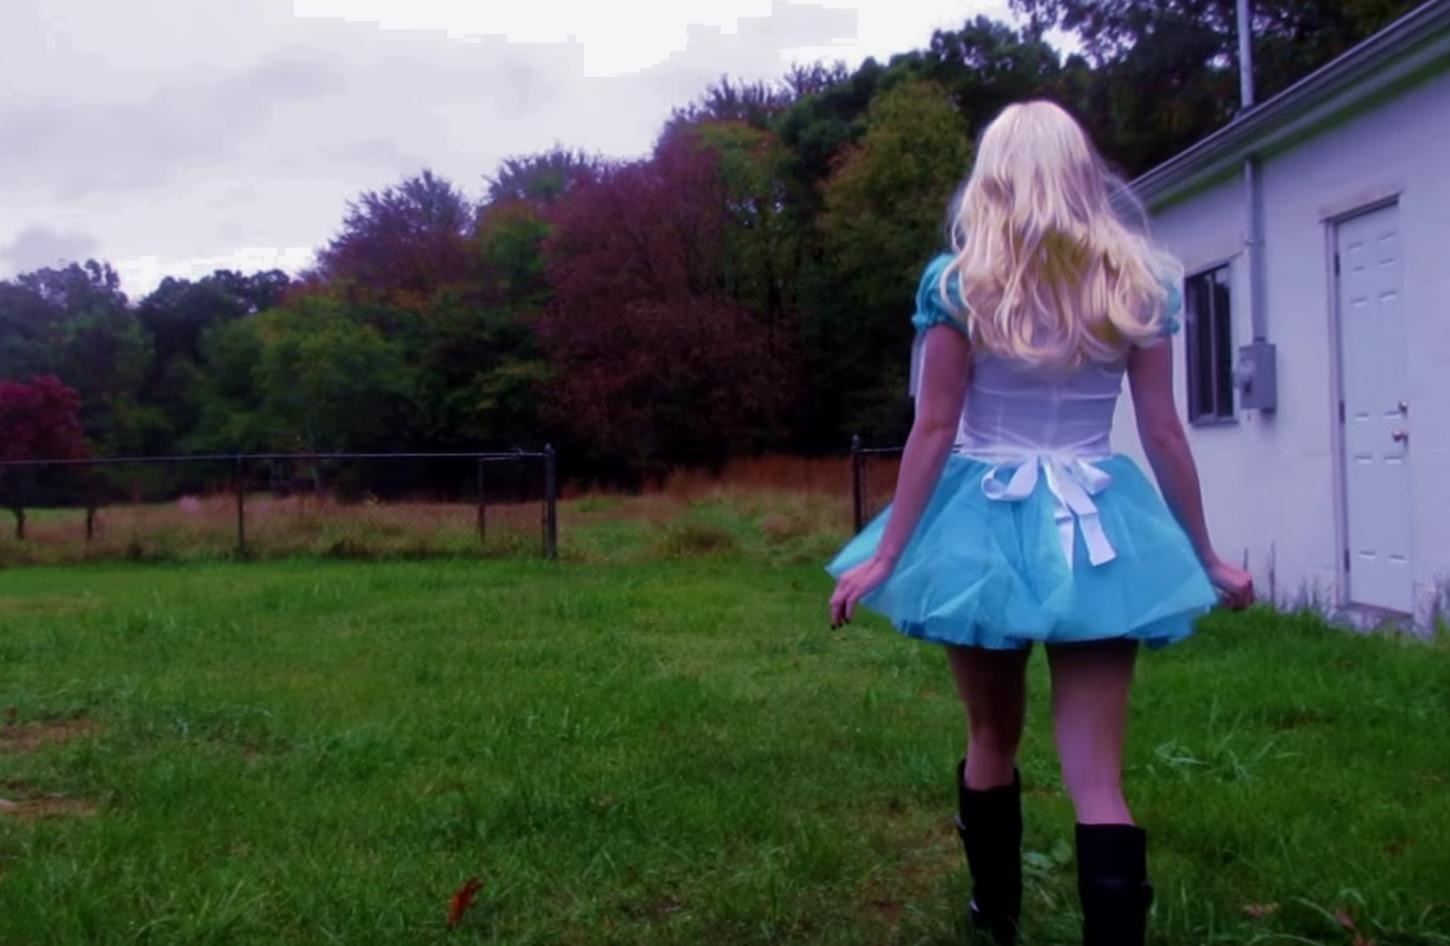 How to Become an "Alice in Wonderland" Character for Halloween